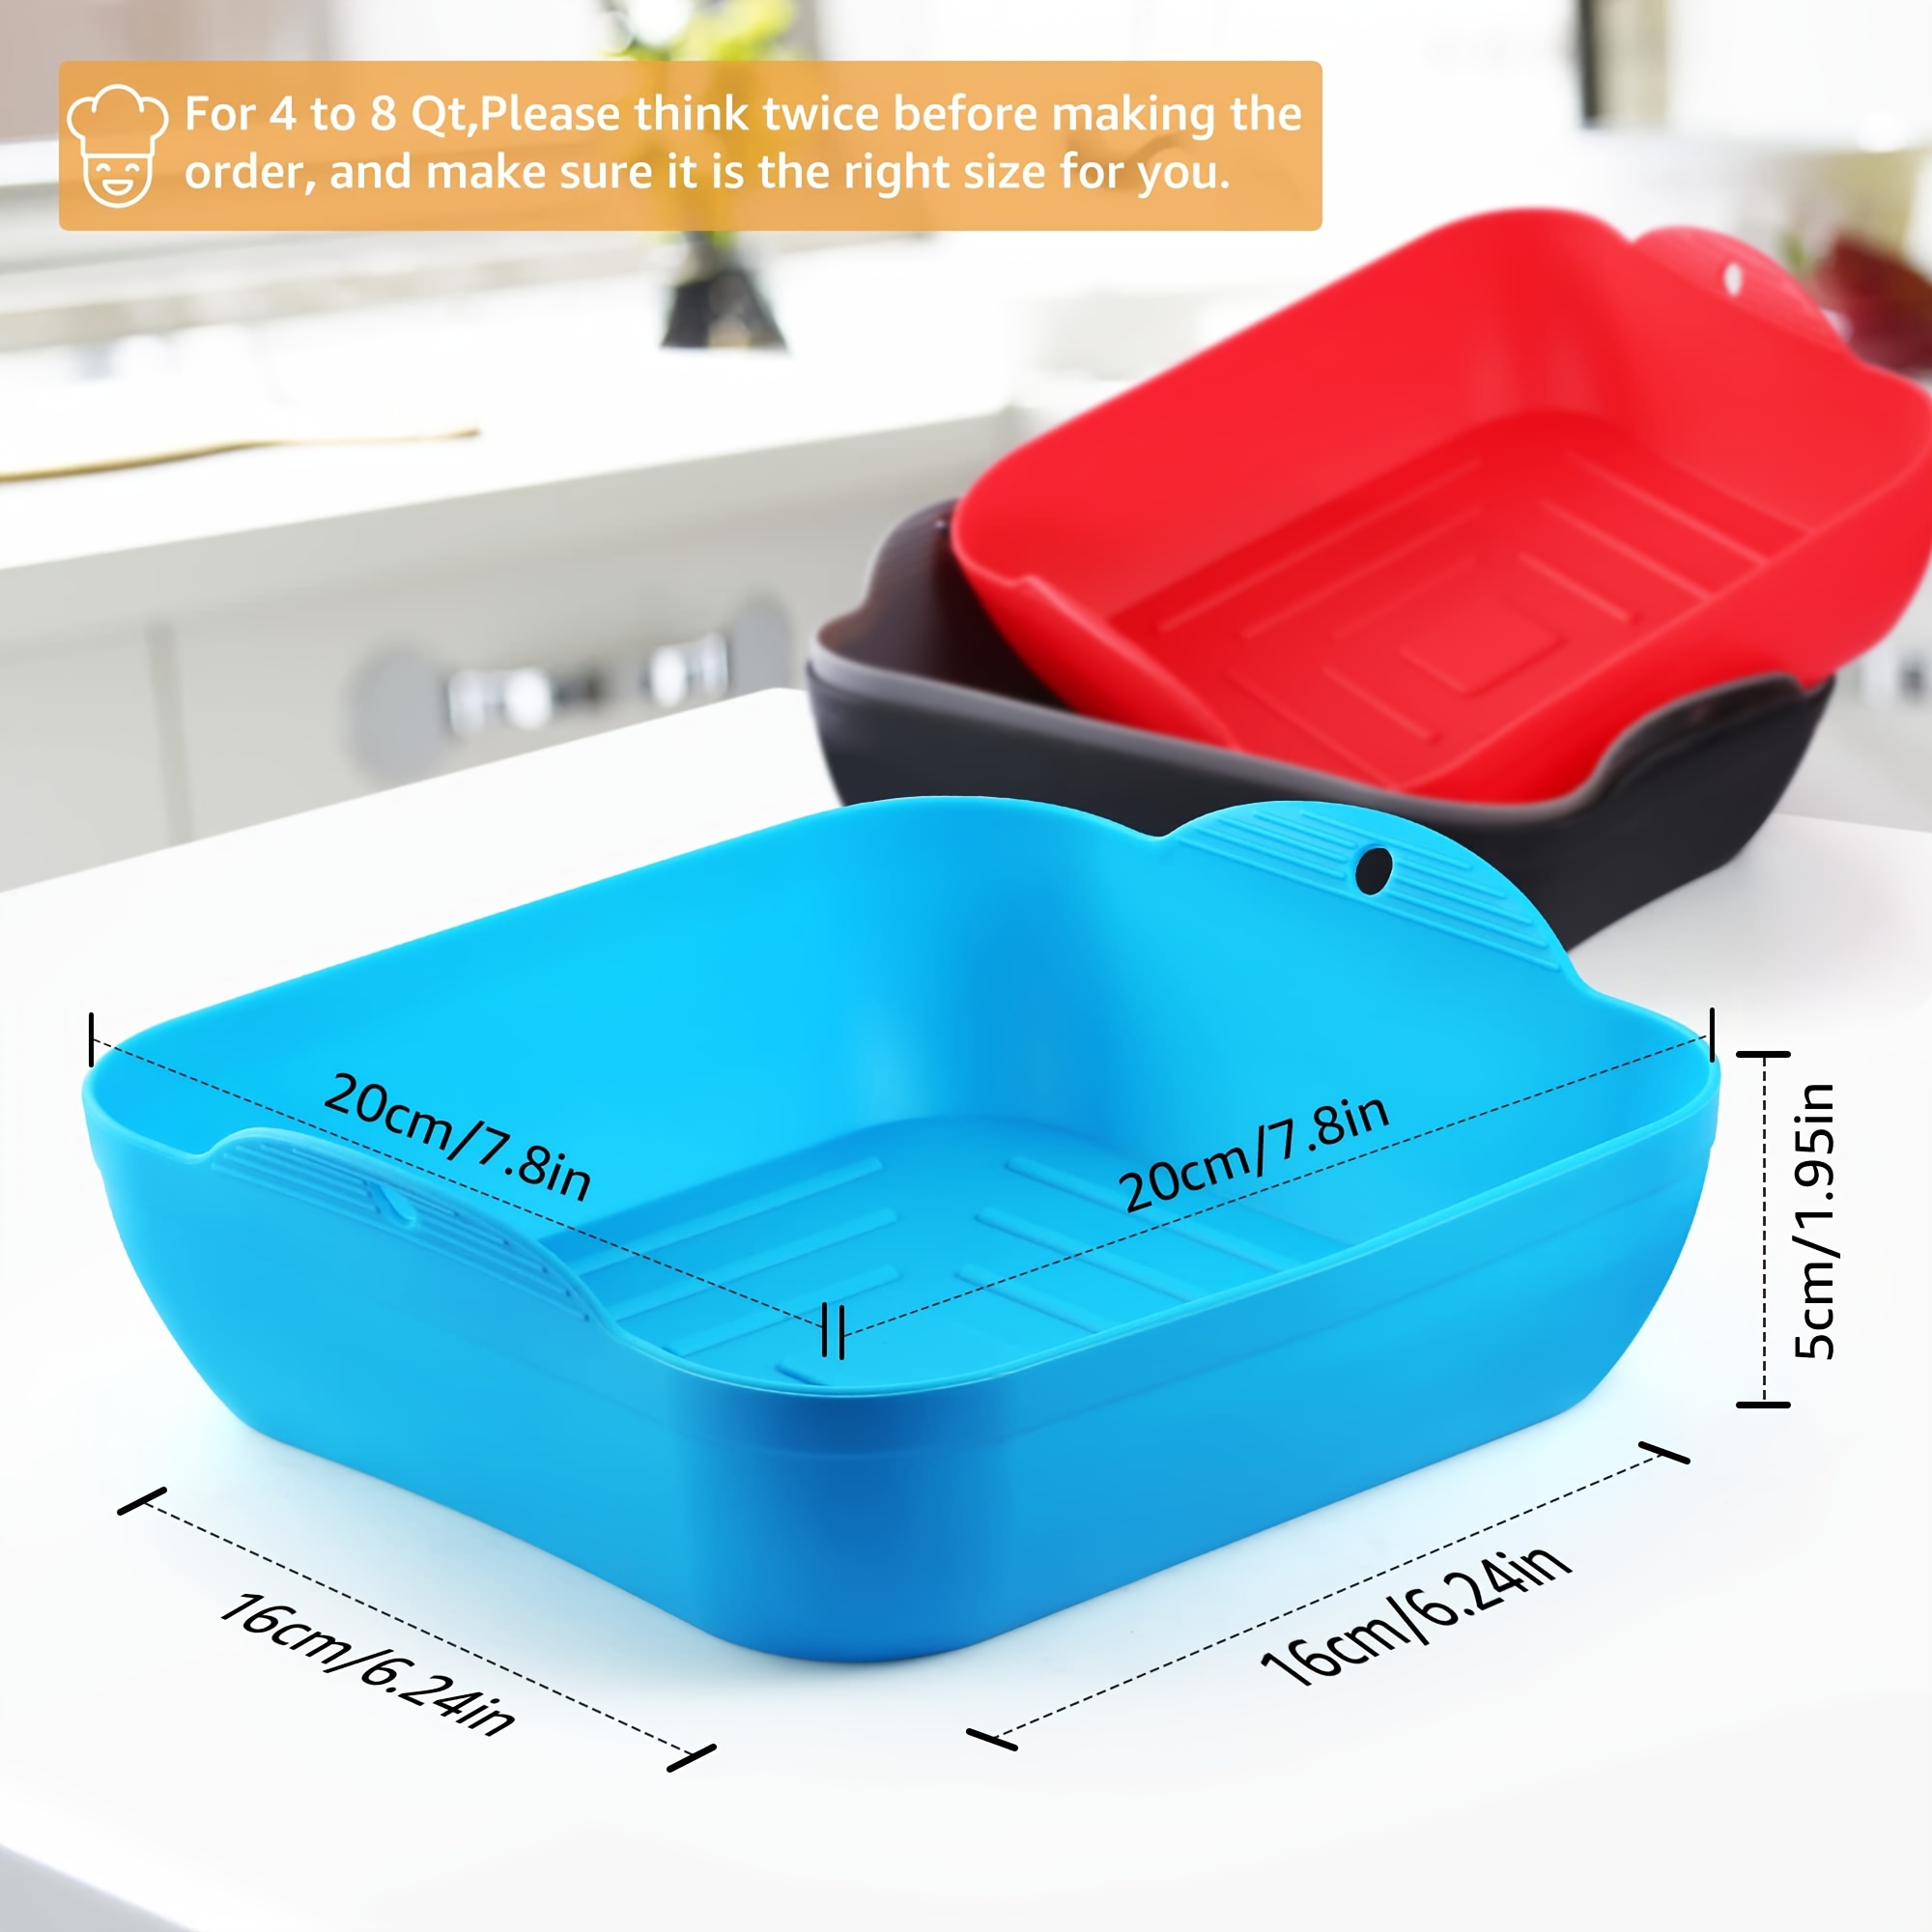 4pcs Foldable Silicone Air Fryer Liners Double Basket, Collapsible